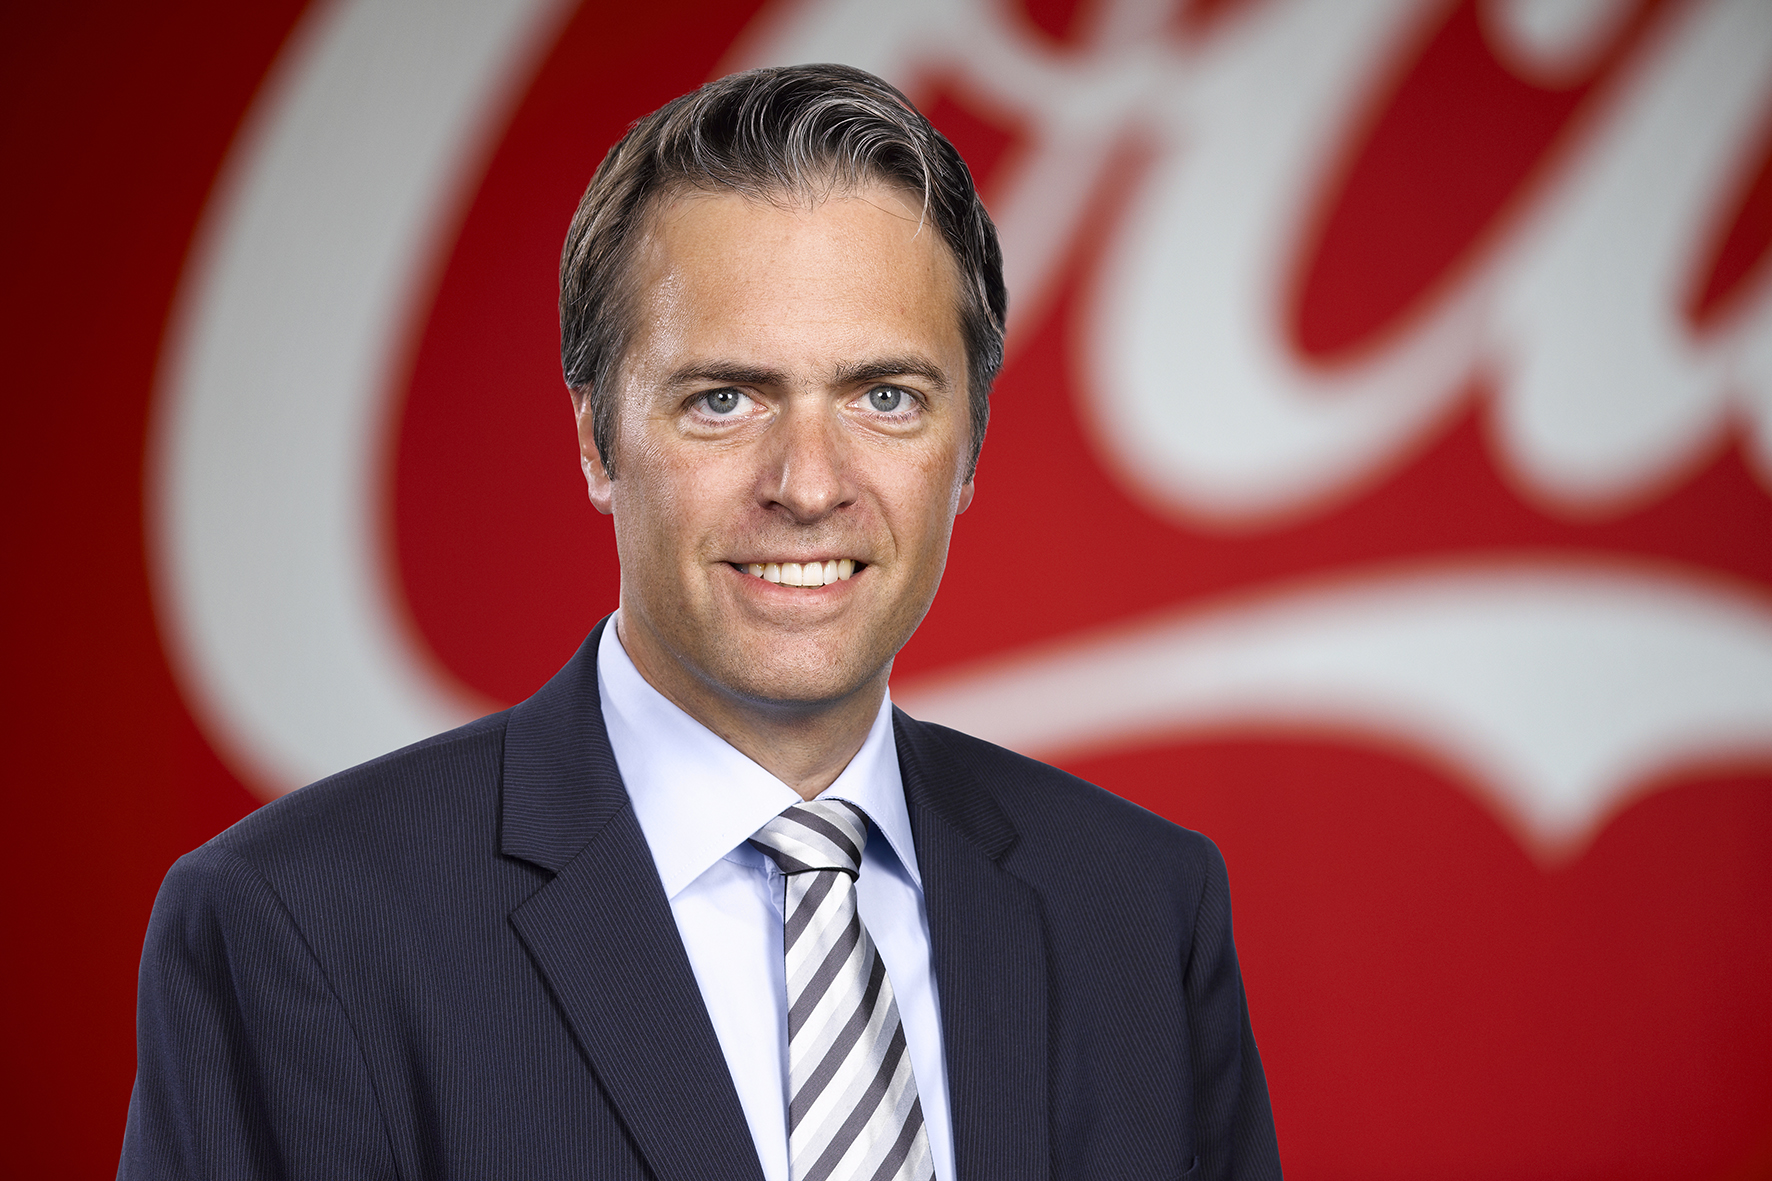 Juerg Burkhalter is the new General Manager of Coca-Cola HBC Bulgaria